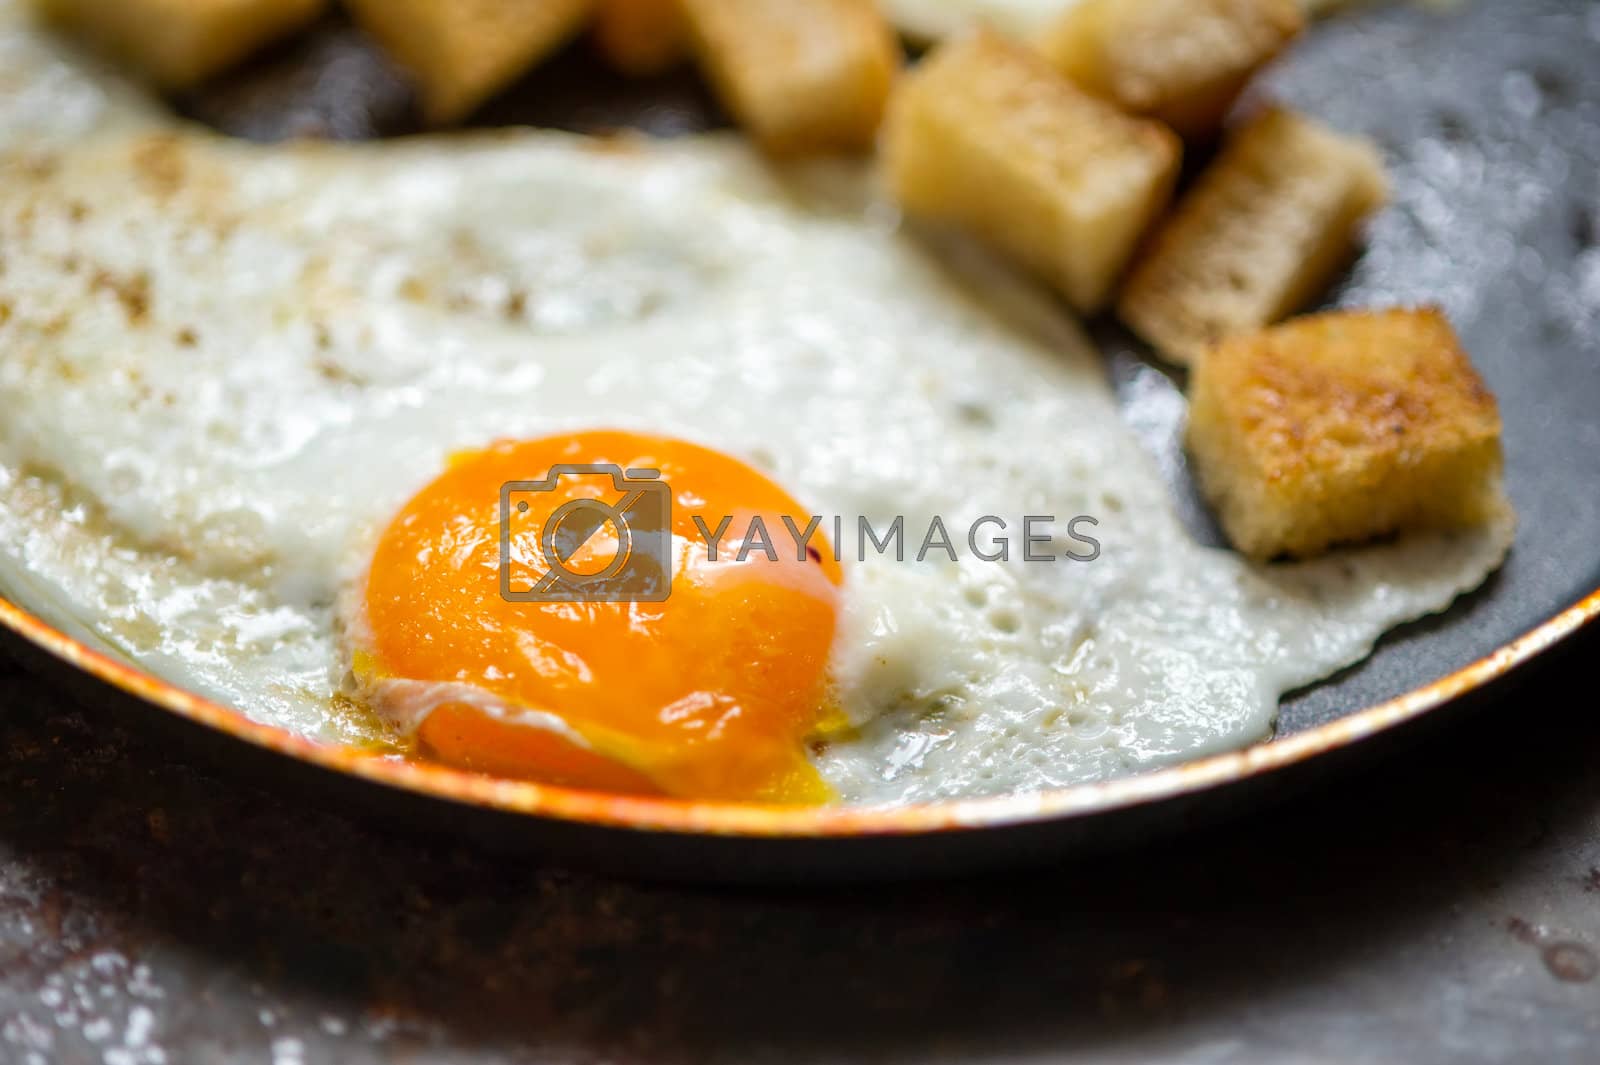 Royalty free image of Scramble eggs with small toasted bread by kirs-ua